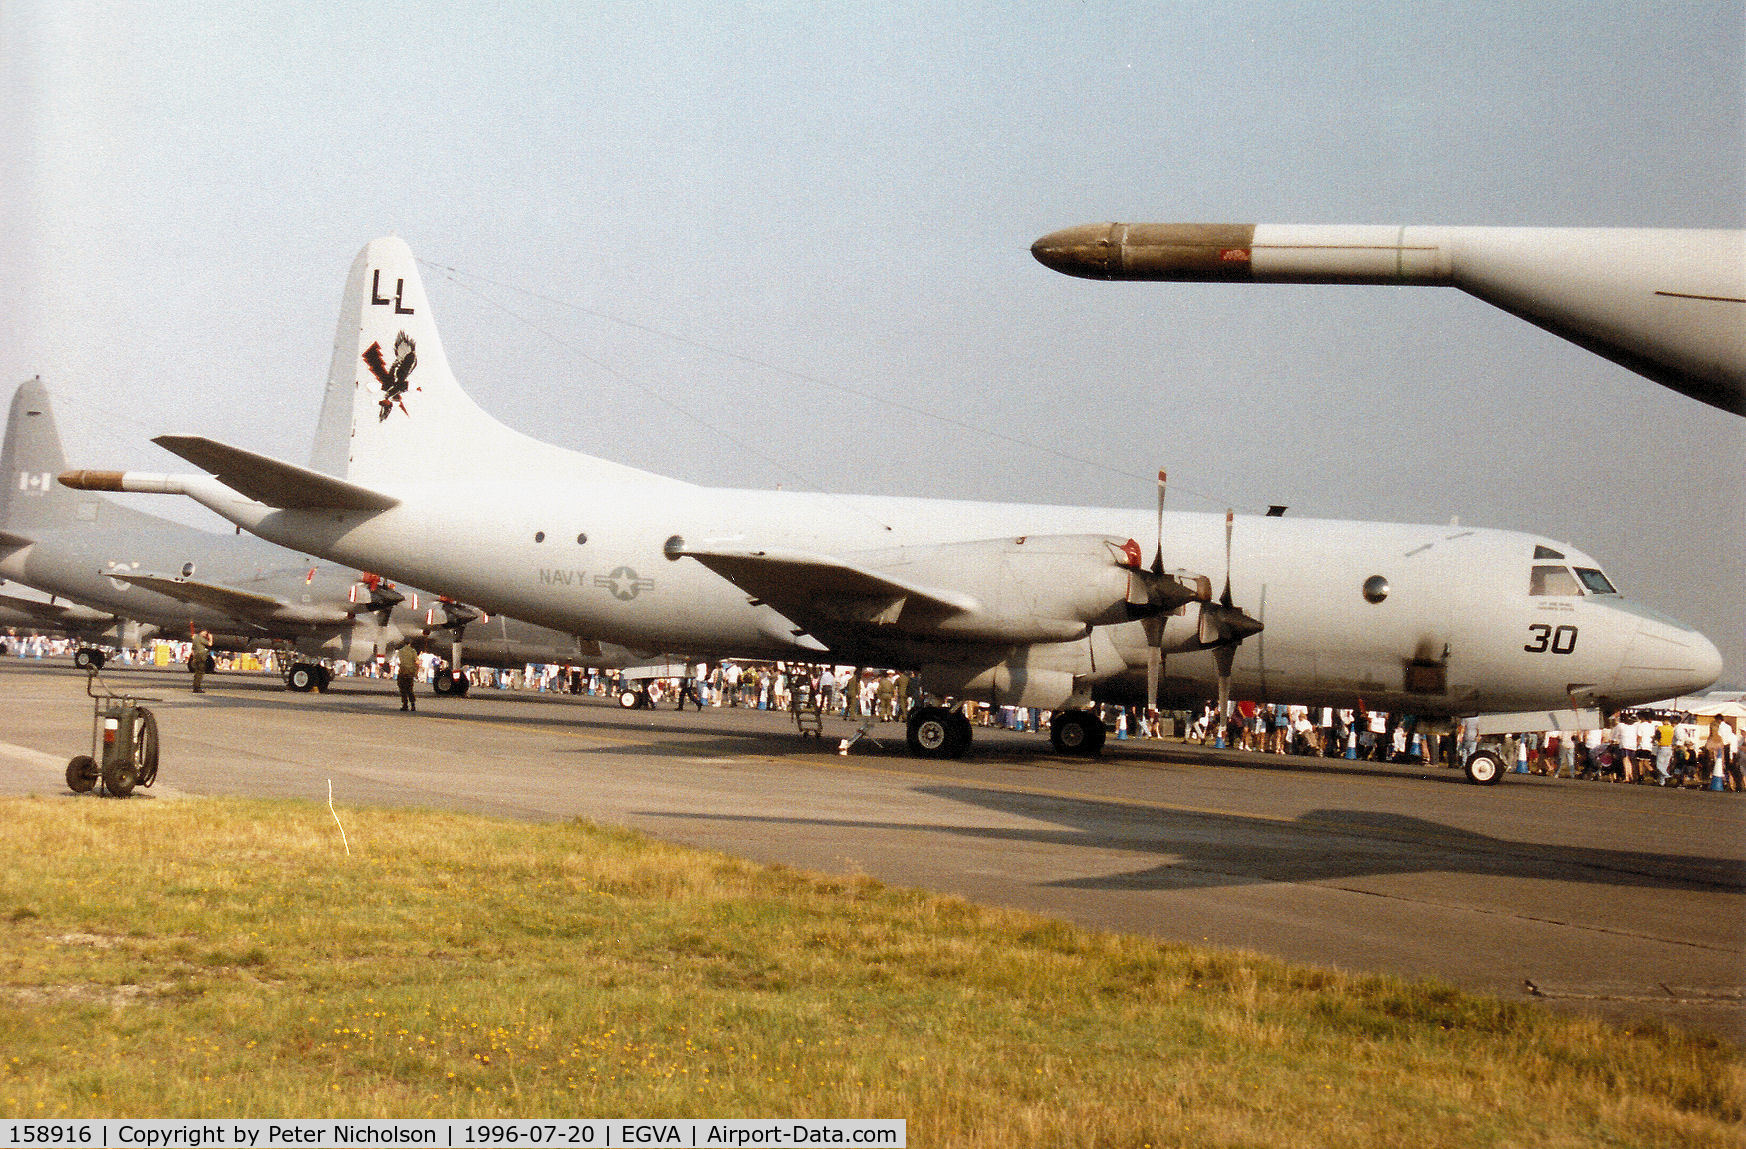 158916, Lockheed P-3C Orion C/N 285A-5588, P-3C Orion of Patrol Squadron VP-30 at Naval Air Station Jacksonville on display at the 1996 Royal Intnl Air Tattoo at RAF Fairford.